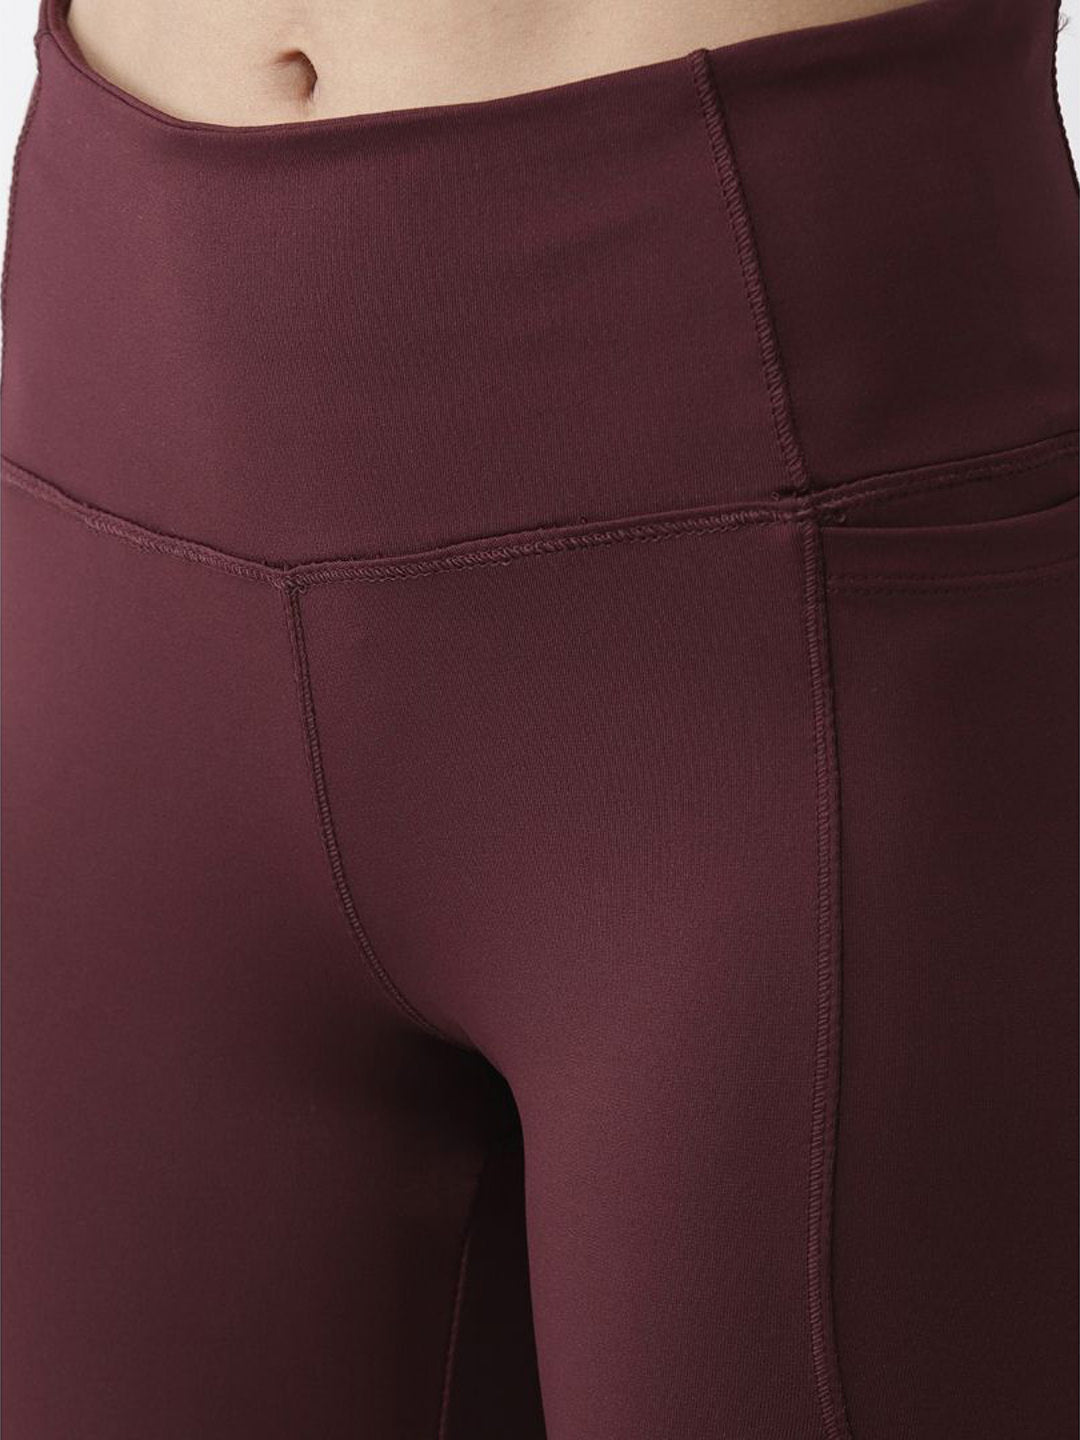 Alcis Women Burgundy Solid Ankle-Length Tights